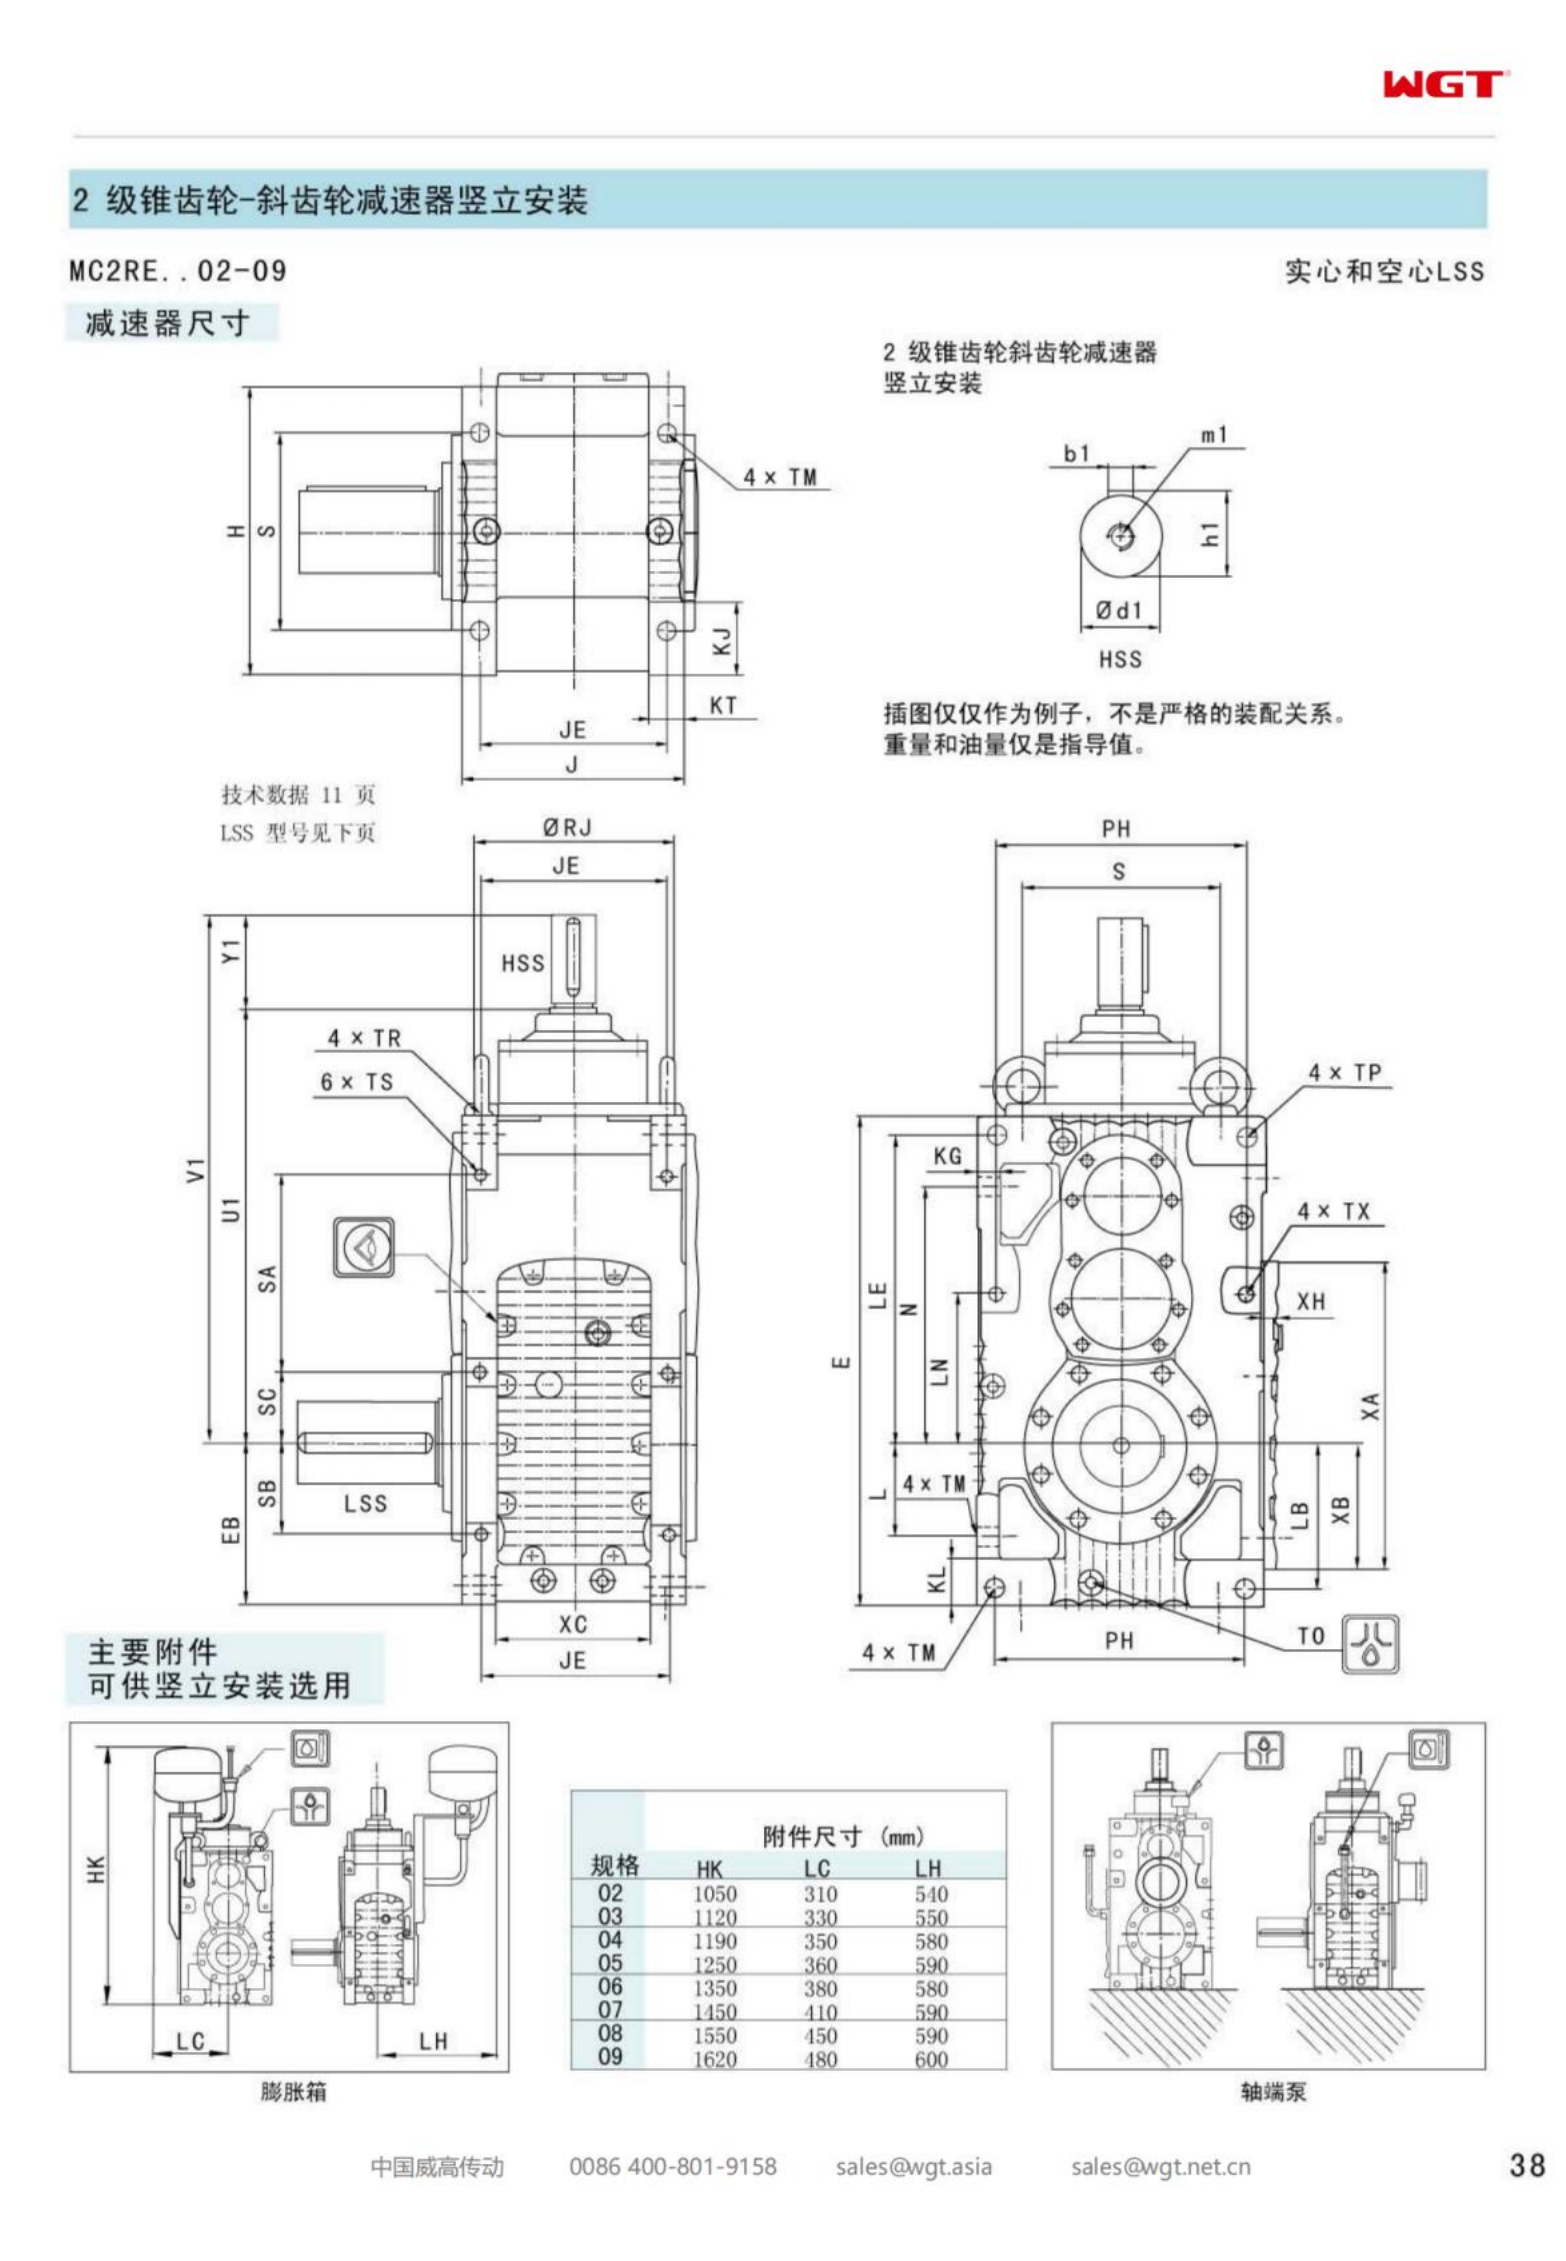 MC2RESF07 Replace_SEW_MC_Series Gearbox